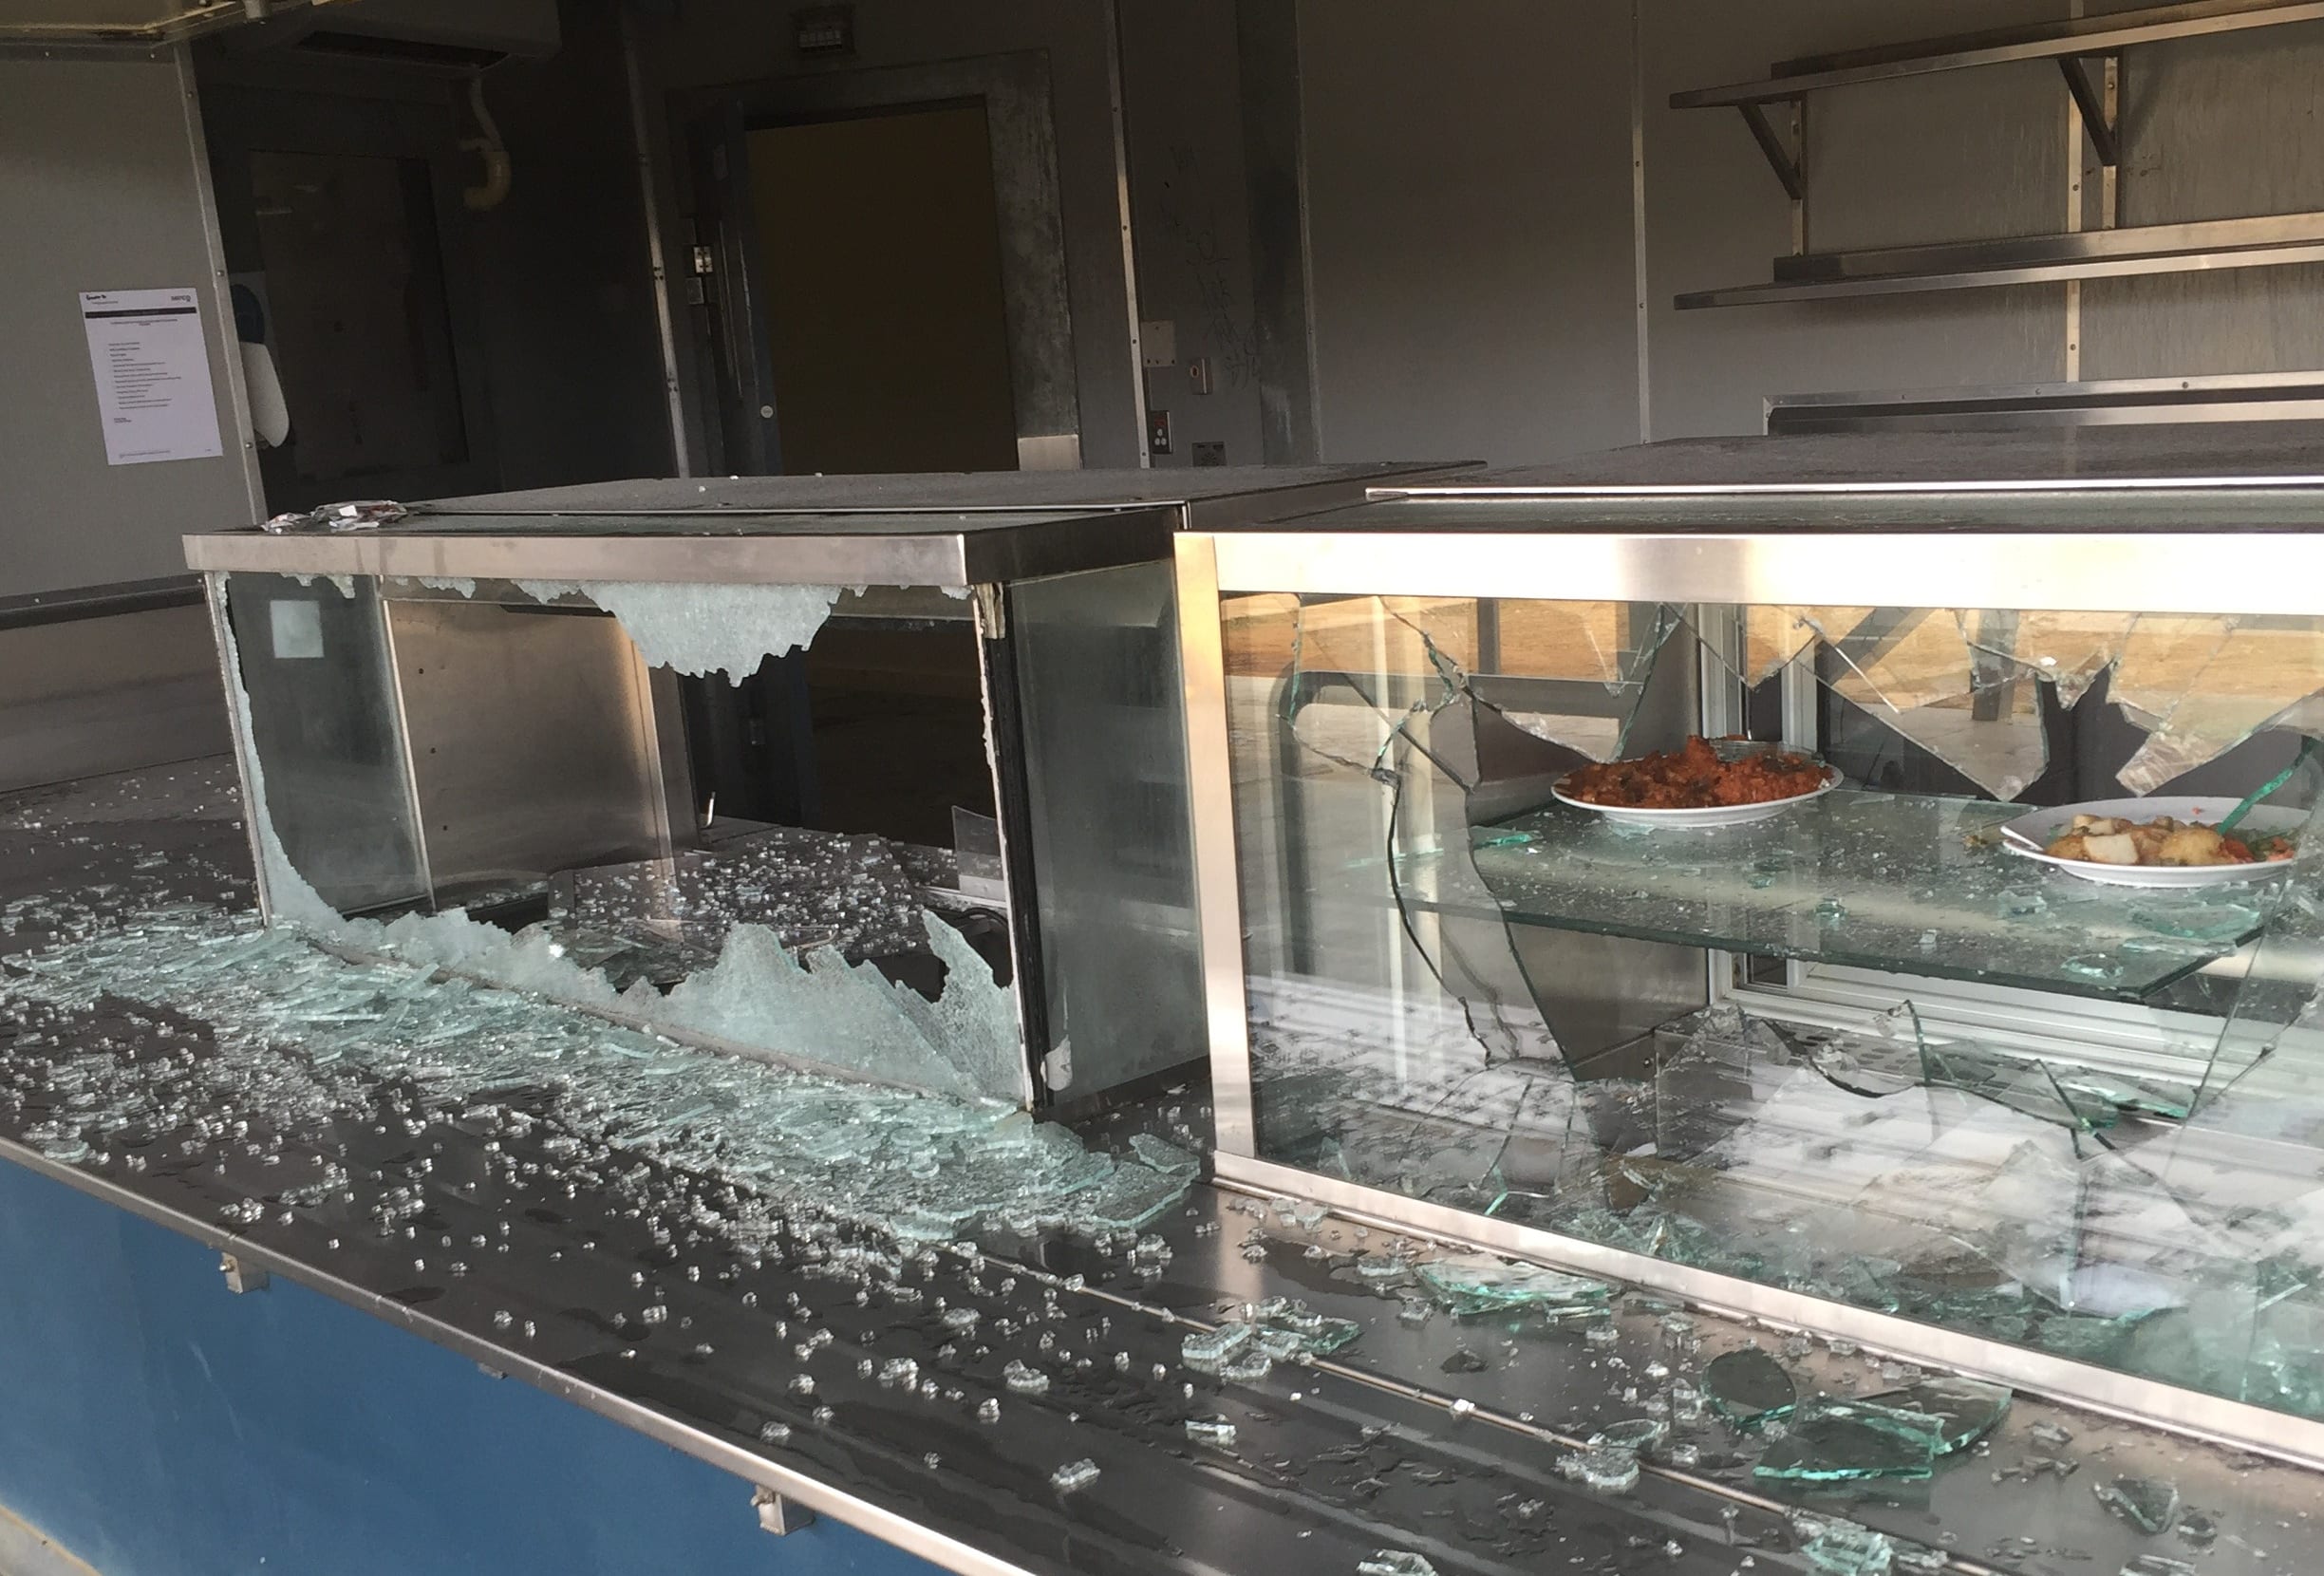 A supplied image shows damage following unrest at the Christmas Island Immigration Detention Centre. The photo was supplied on 11 November 2015 by the office of Australian MP Peter Dutton.